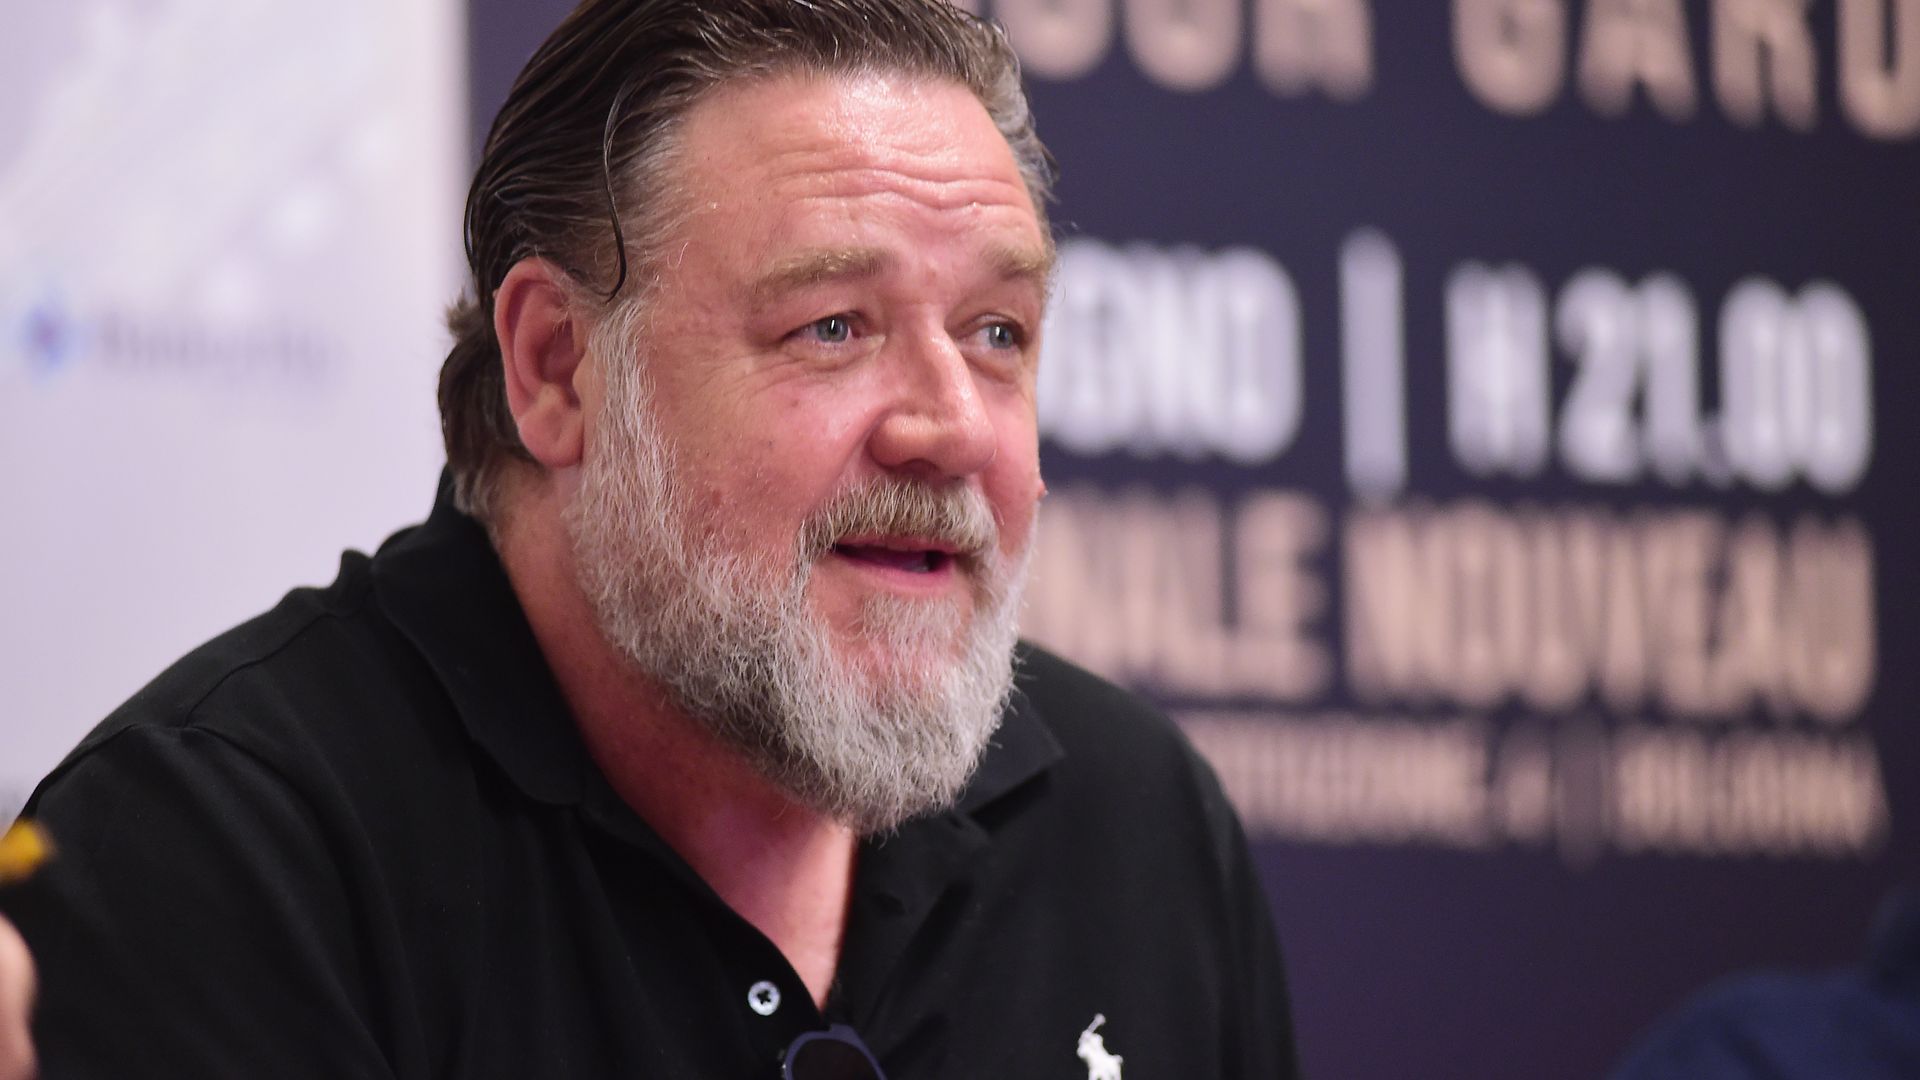 Russell Crowe, 59, unrecognizable in new photos: 'He looks 20 years younger'